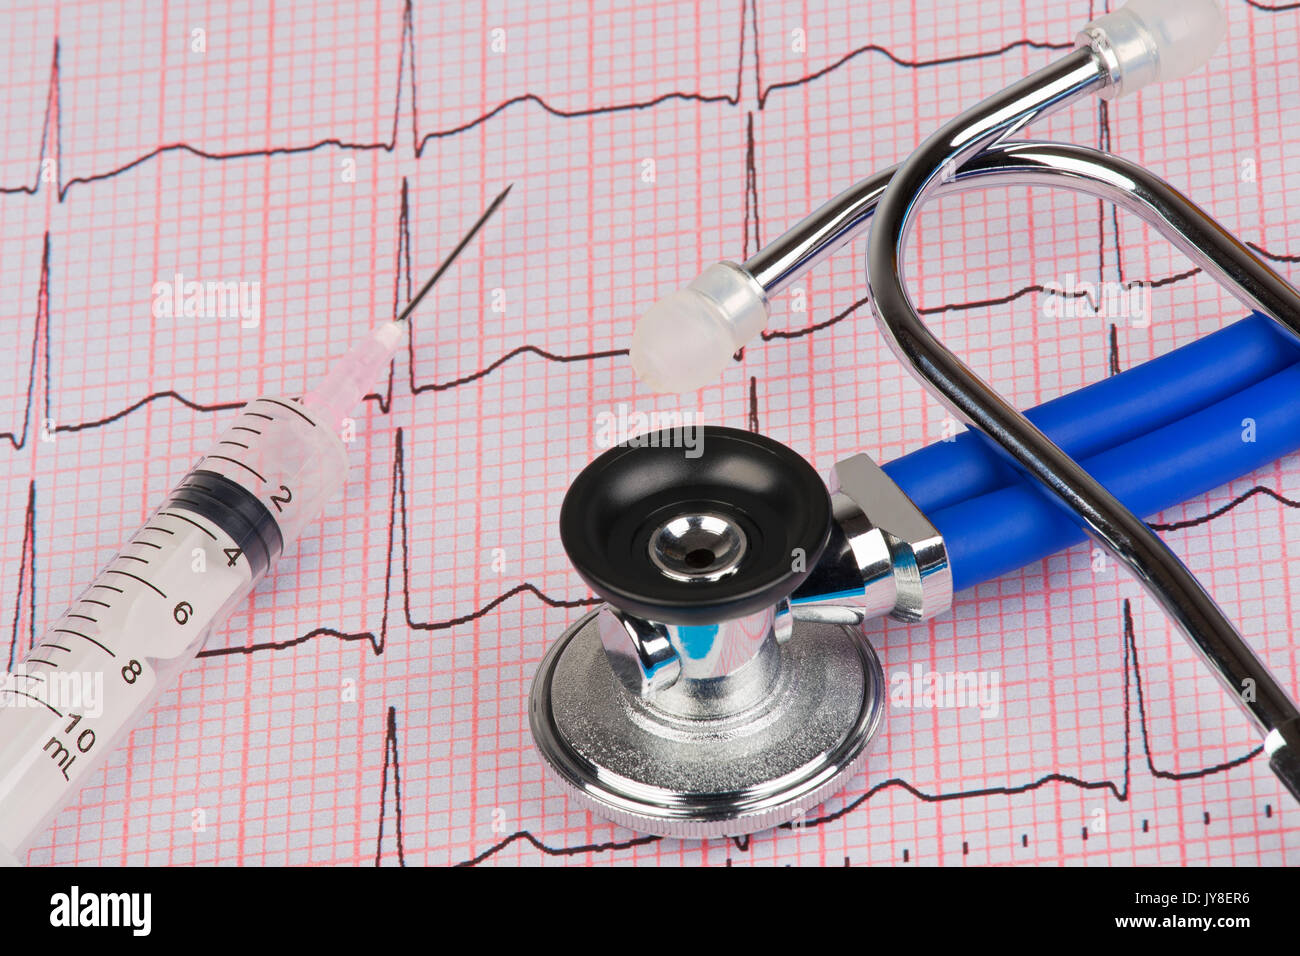 Close up of a Electrocardiograph also known as a EKG or ECG graph with a stethoscope and syringe Stock Photo